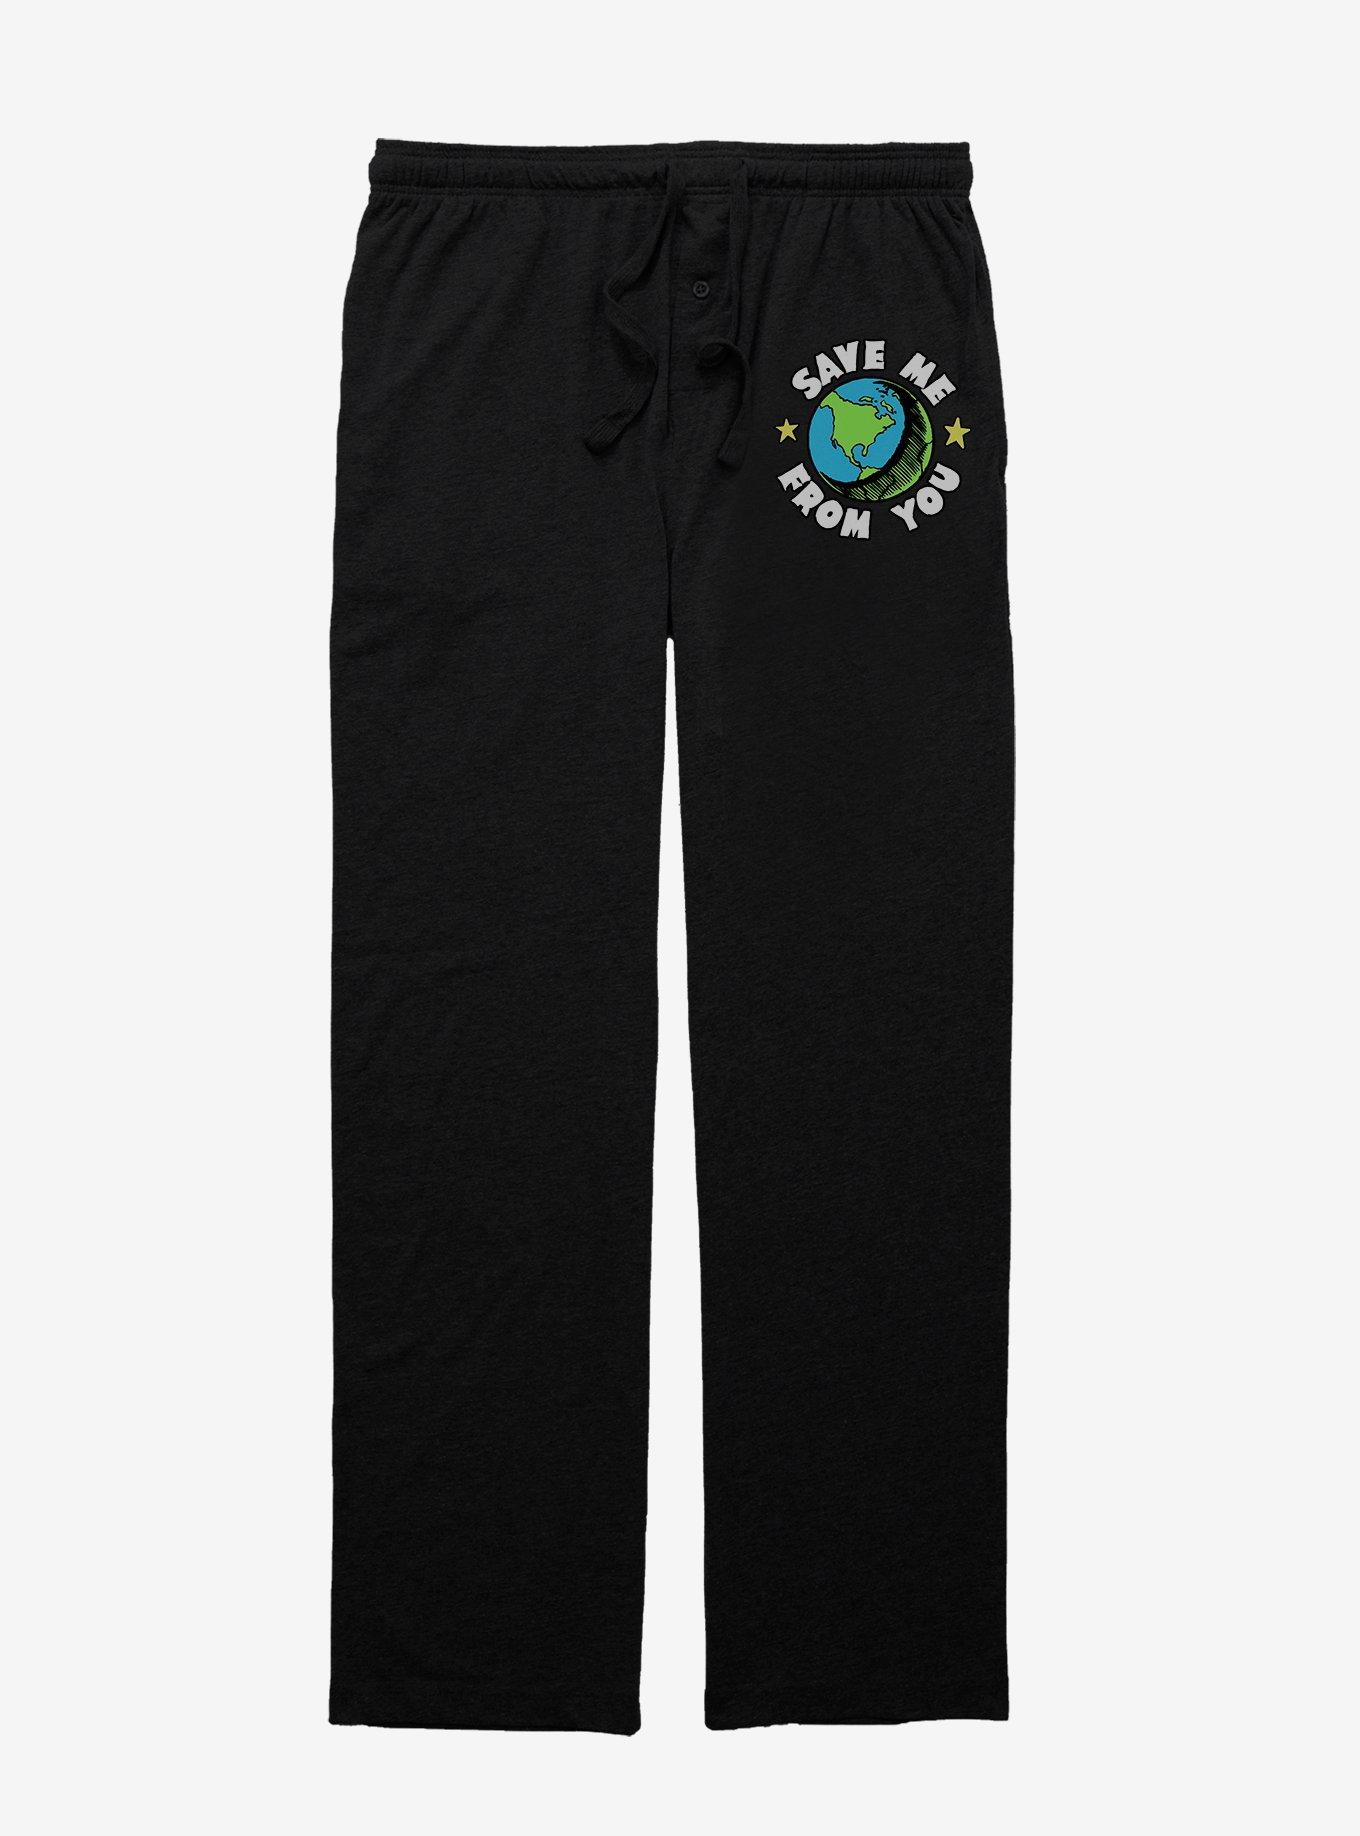 Cozy Collection Save The Earth Pajama Pants, BLACK, hi-res